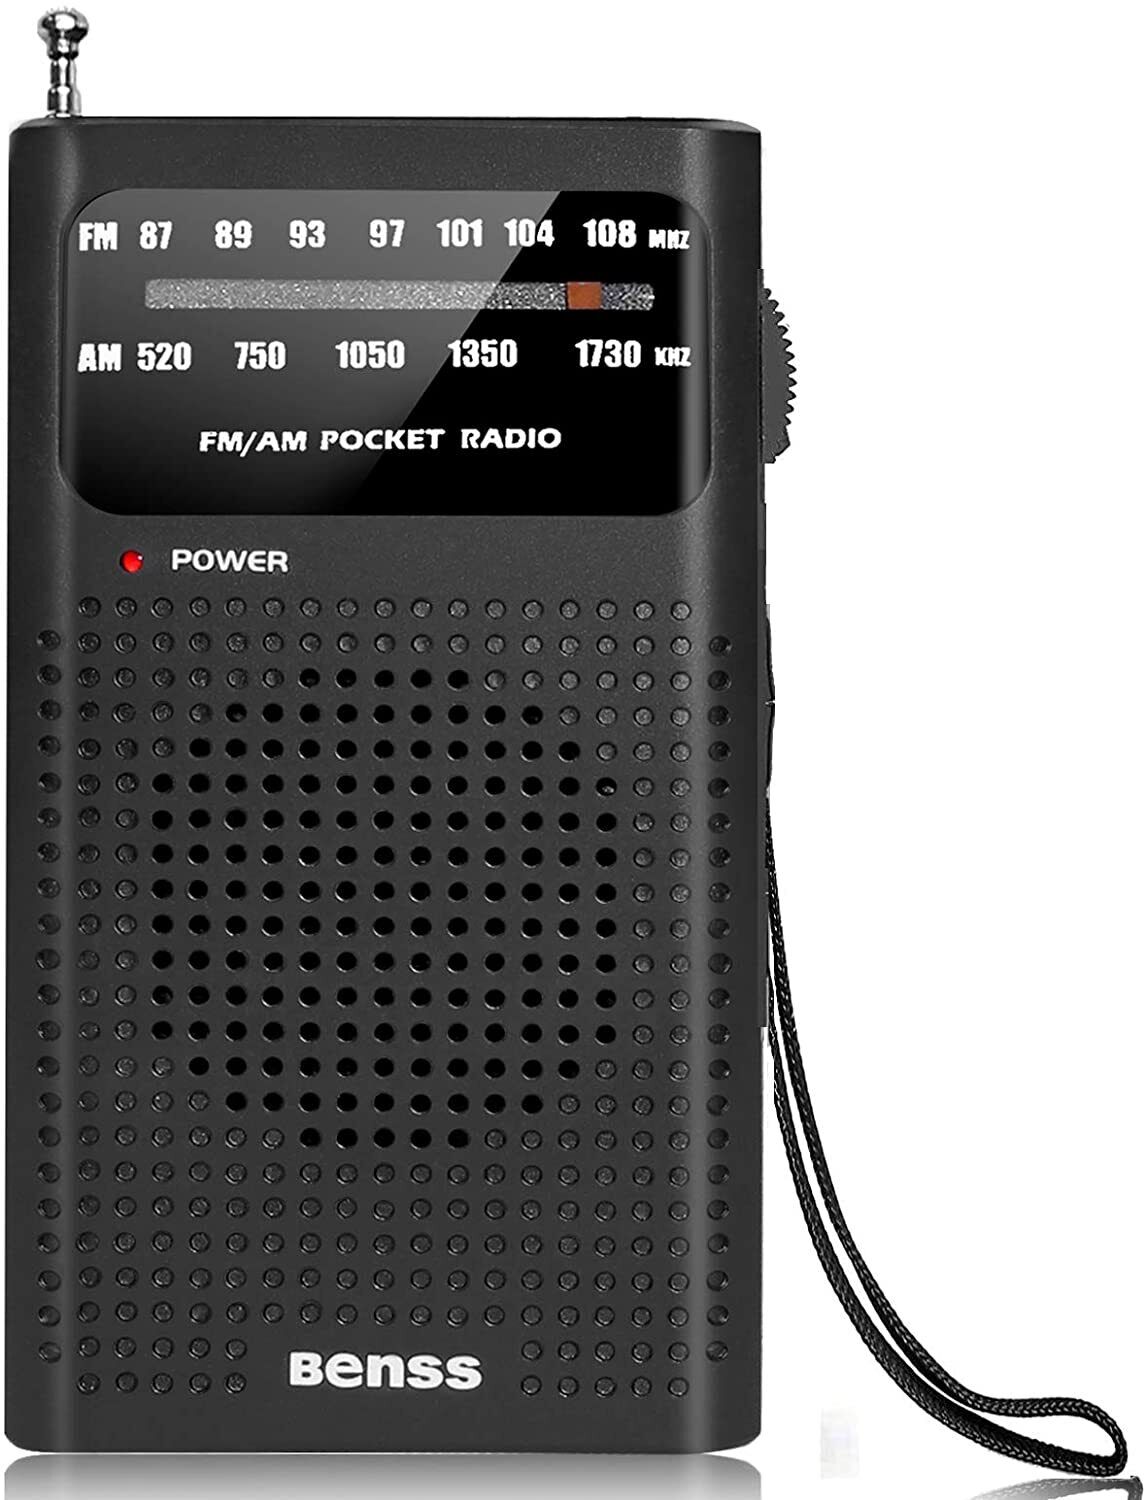 Portable Radio AM FM, Operated by 2 AA Battery, with Speaker & Headphone Jack